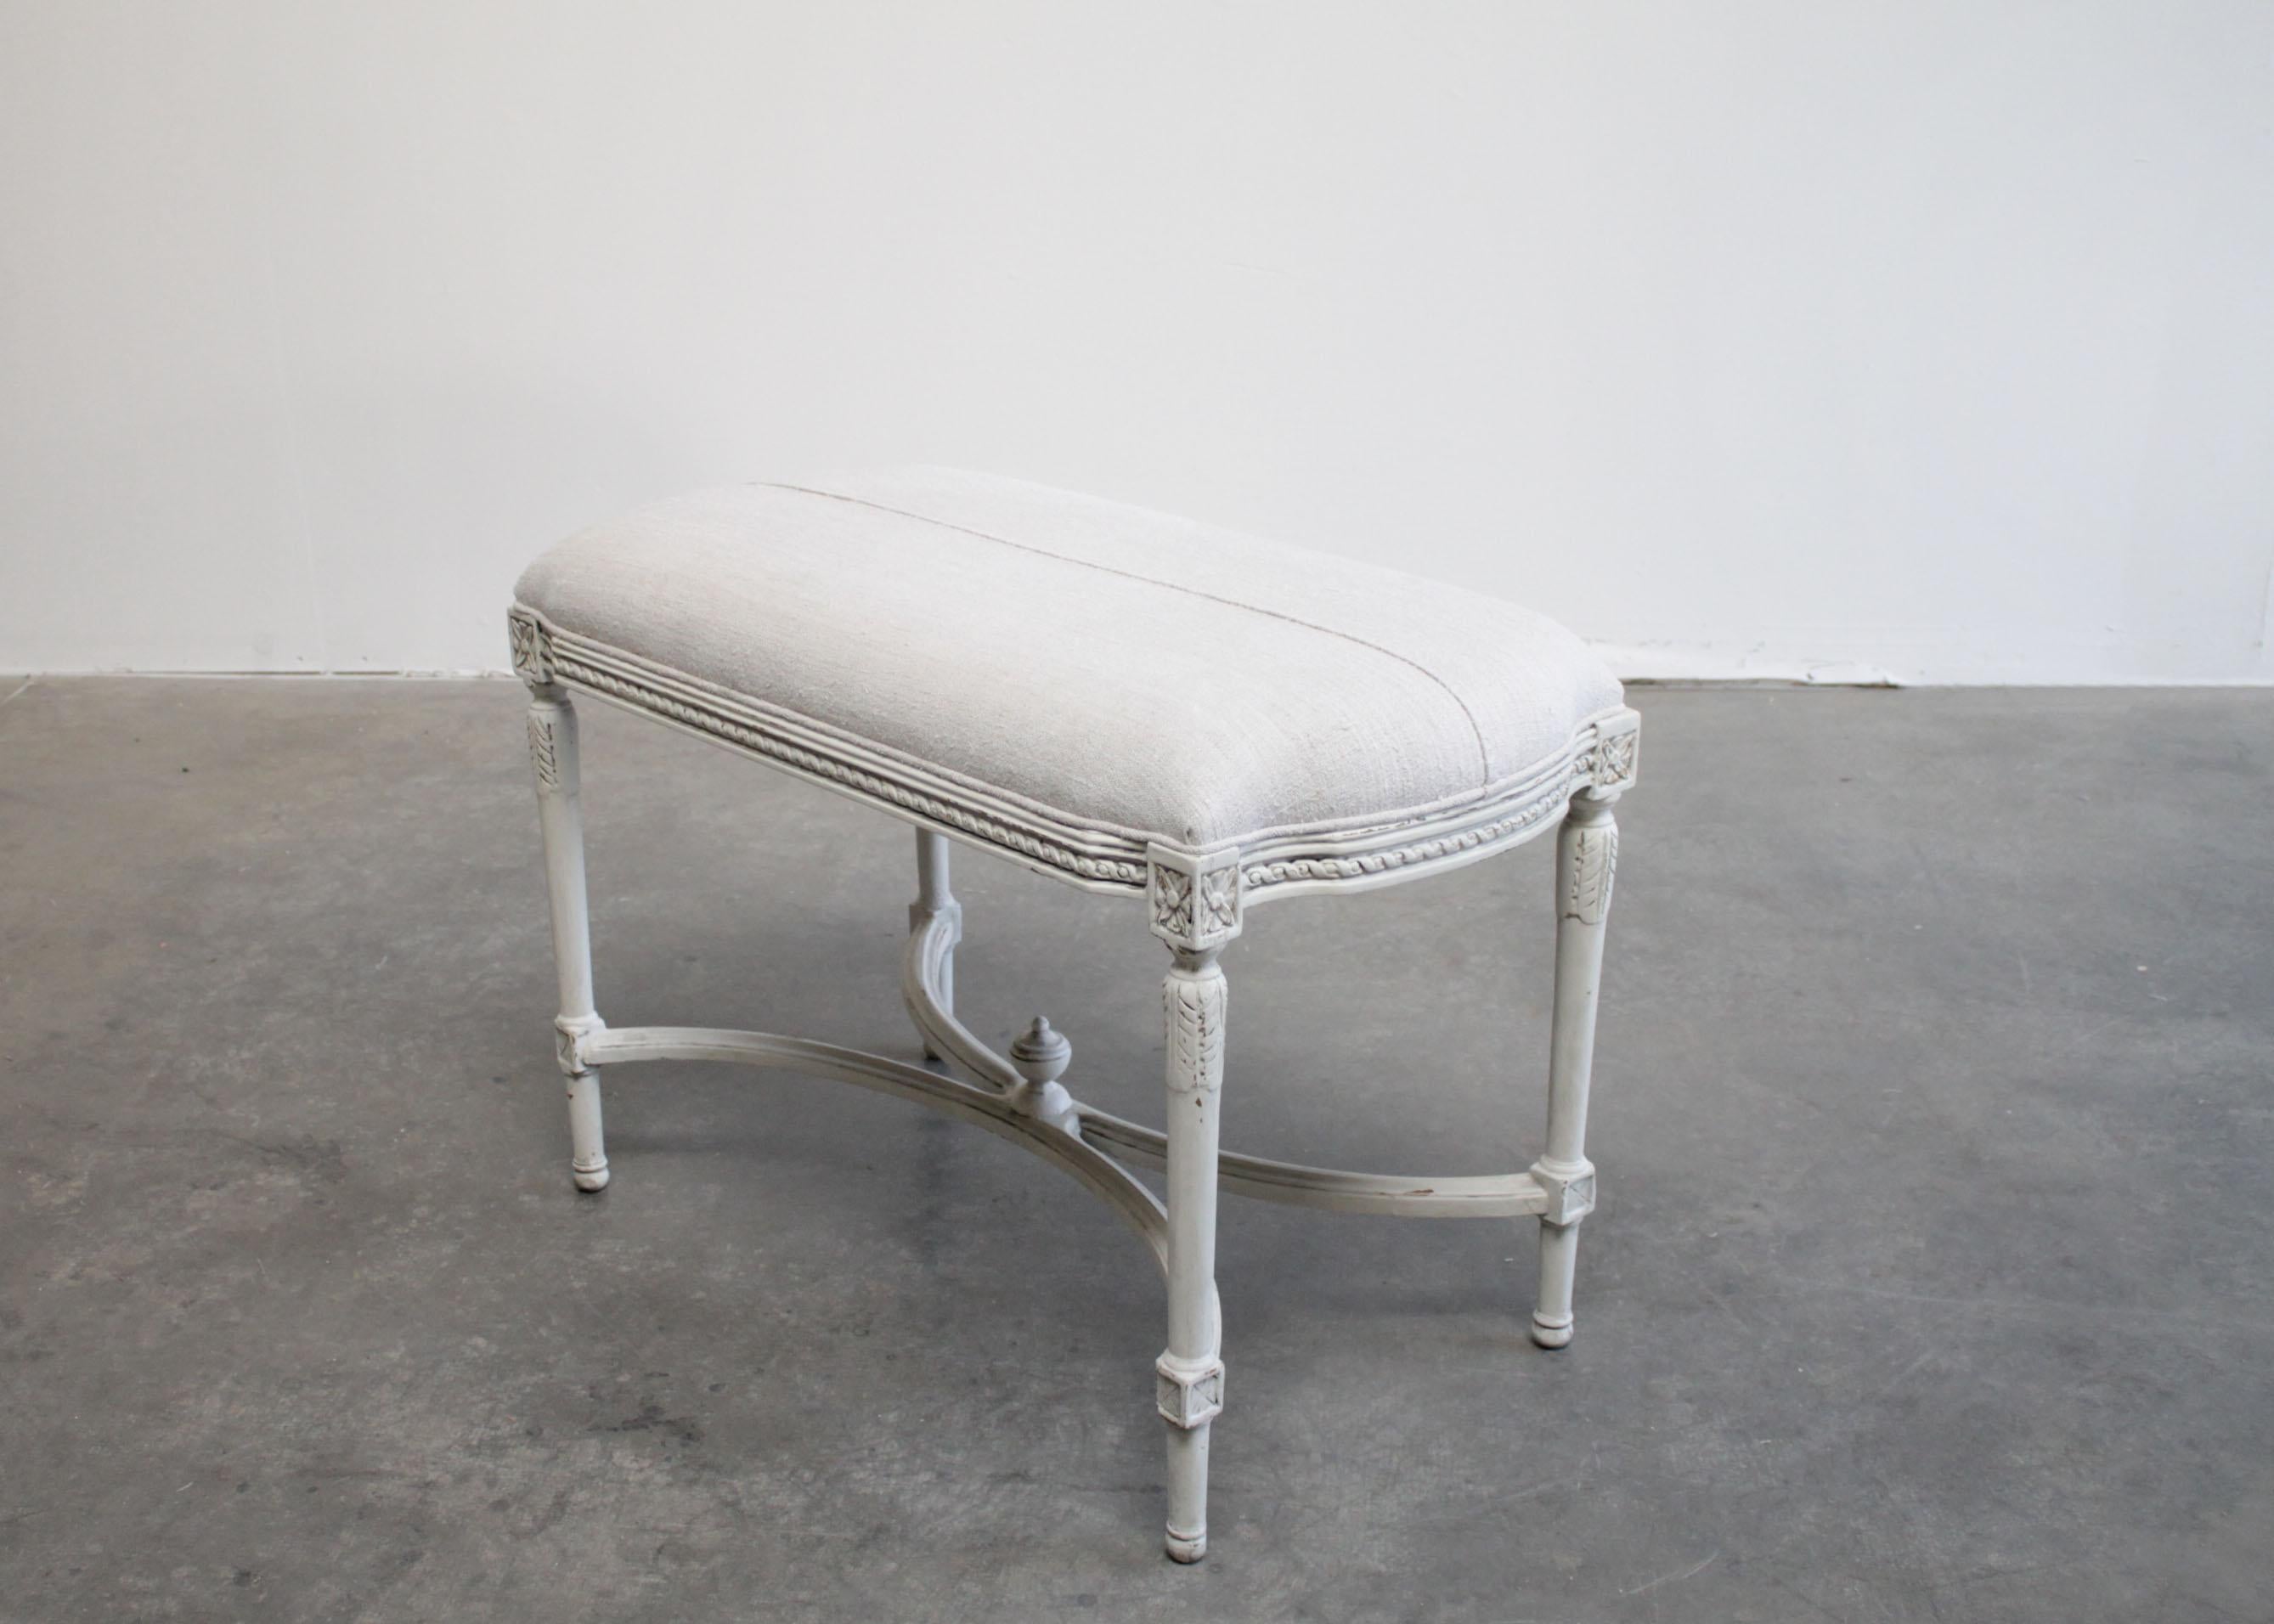 Antique Louis XVI style upholstered high bench ottoman with antique linen
Beautiful frame painted in a soft oyster white, with subtle distressed edges, and glazed finish.
We upholstered this in a beautiful antique European homespun nubby linen in